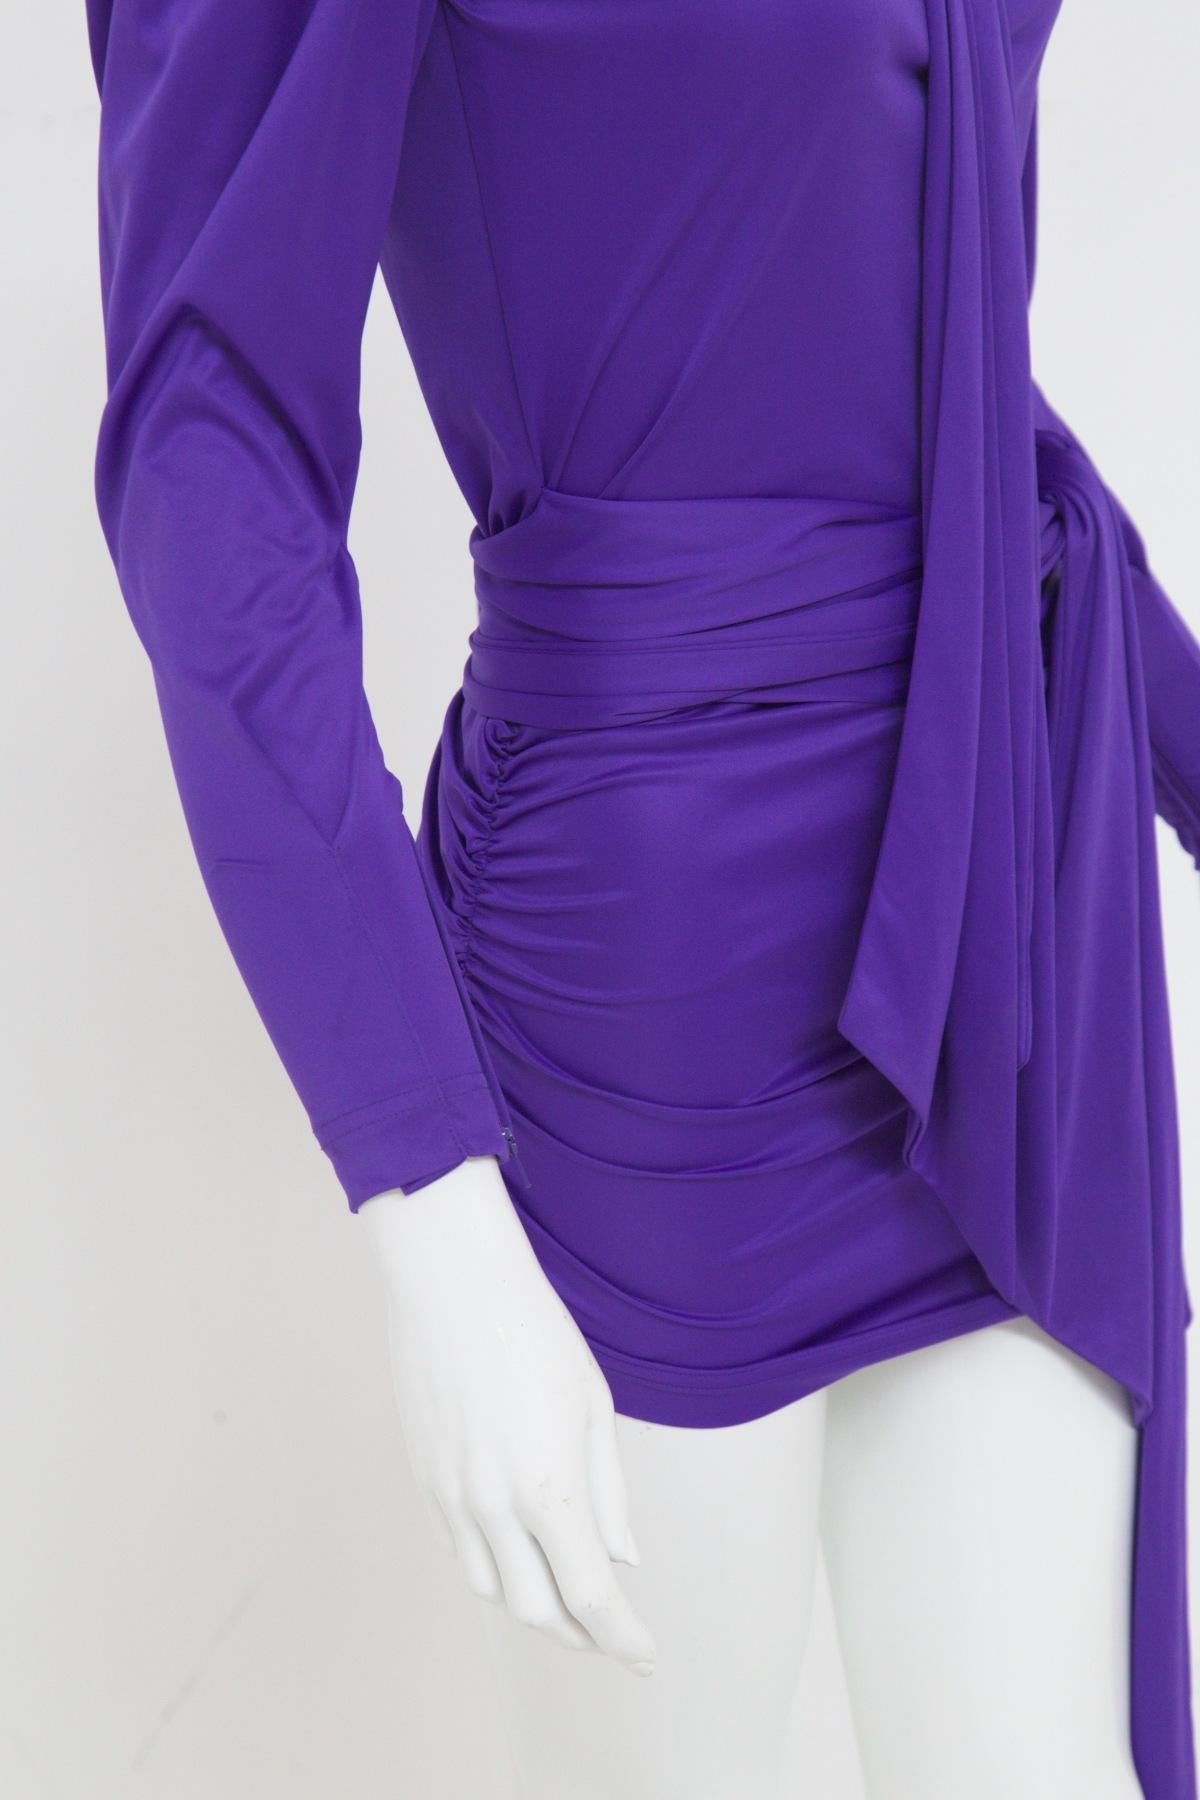 Balenciaga Luxurious Vintage Purple Dress In Good Condition For Sale In Milano, IT